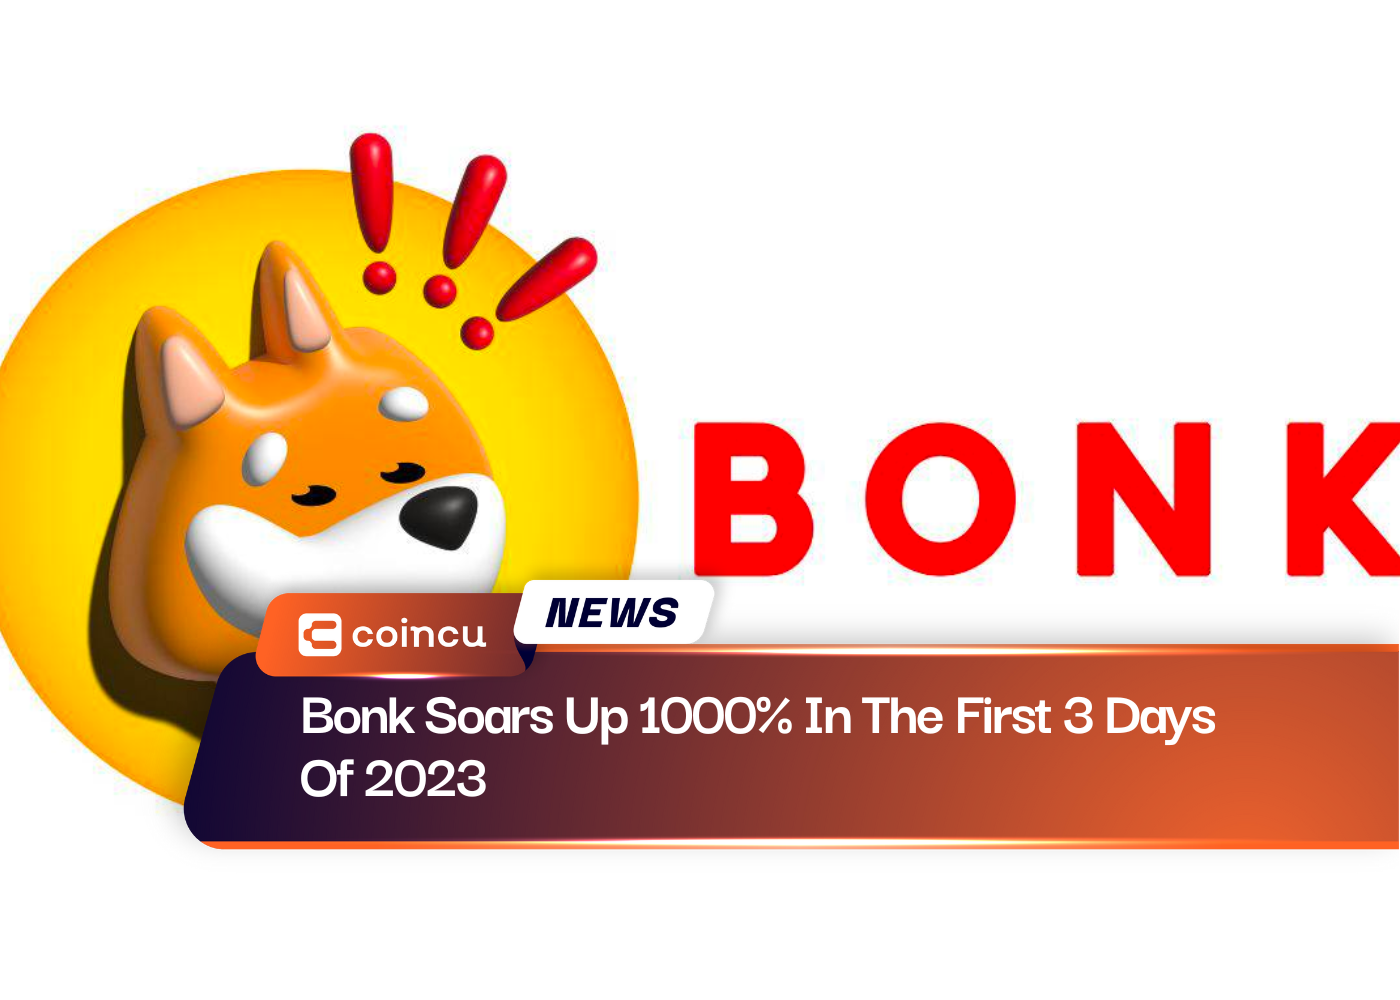 Bonk Soars Up 1000% In The First 3 Days Of 2023